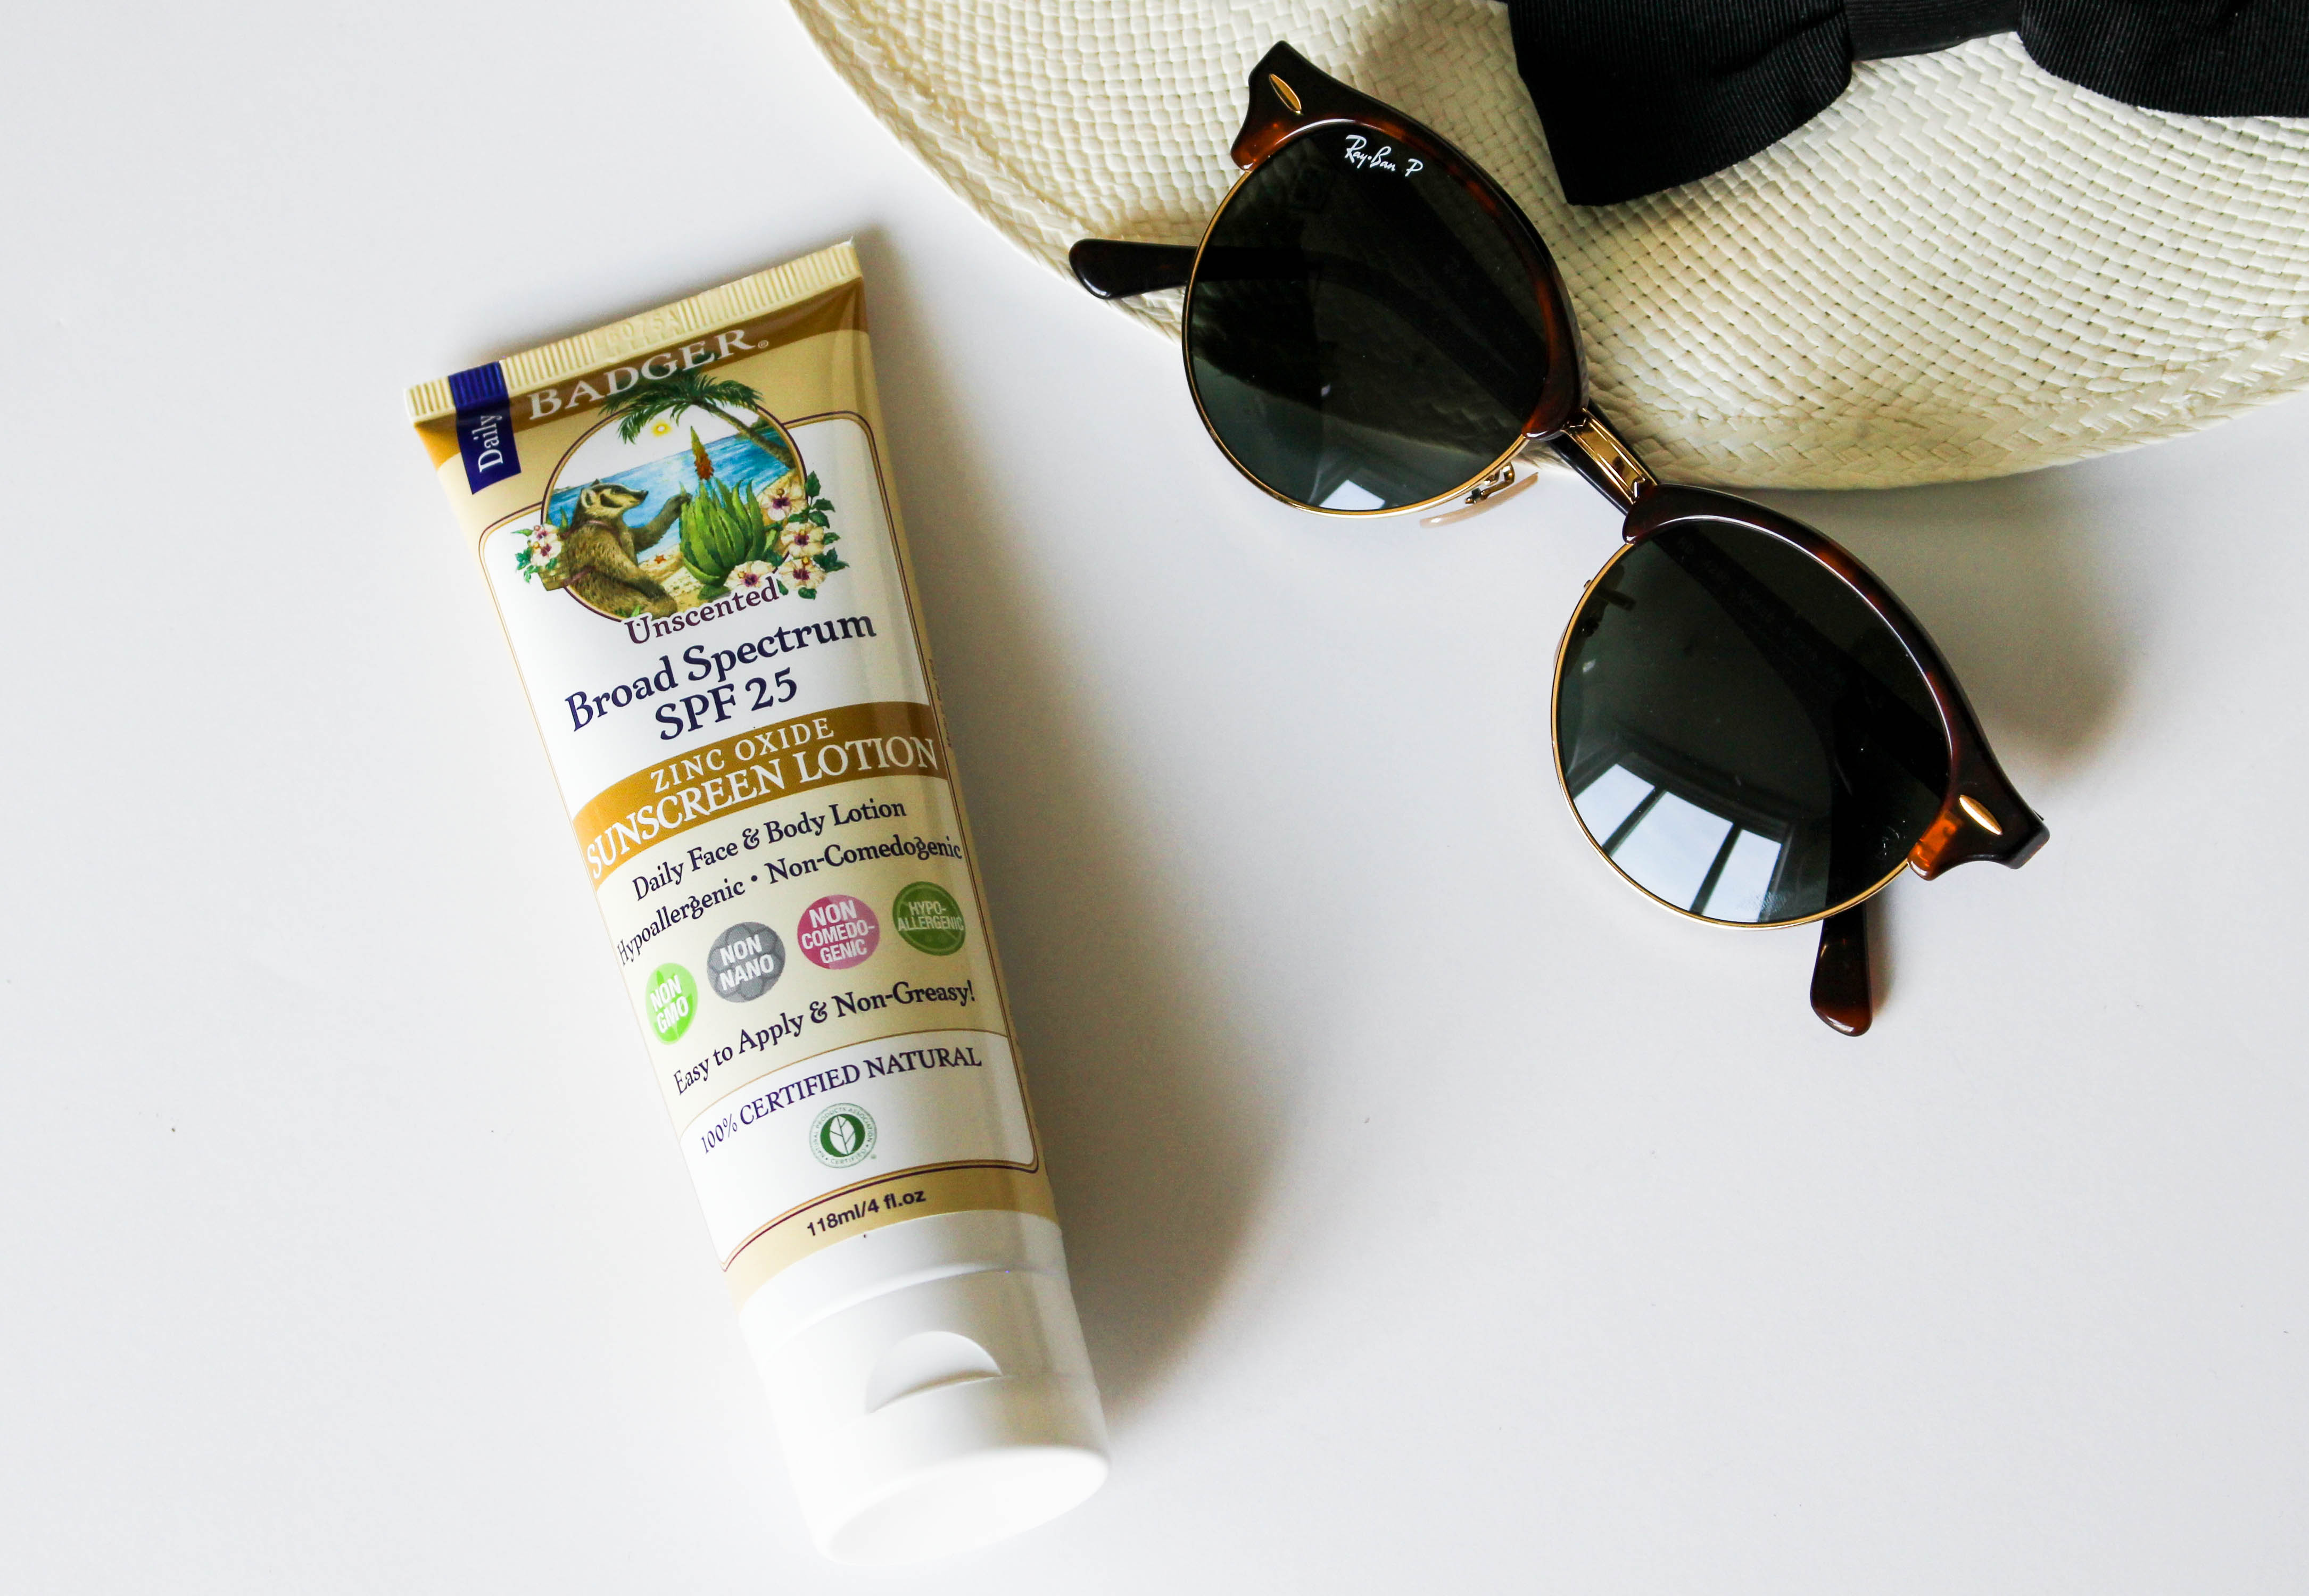 Badger Daily Face & Body Sunscreen Lotion